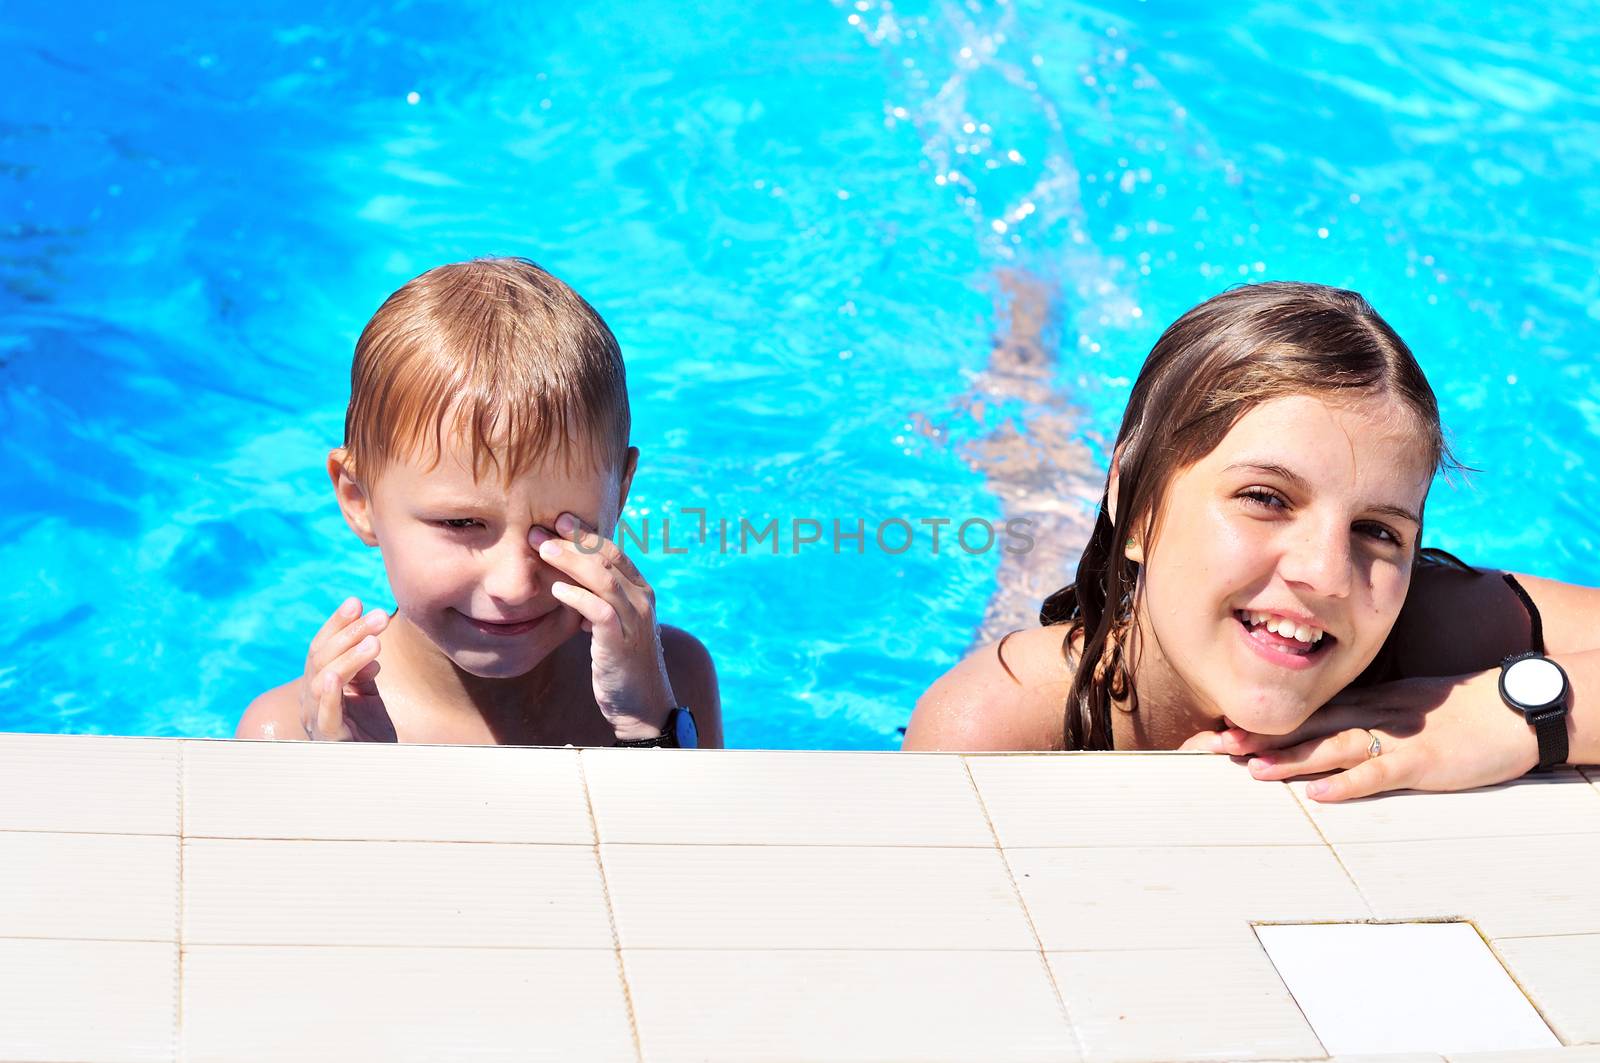 brothe and sister having good time in the pool